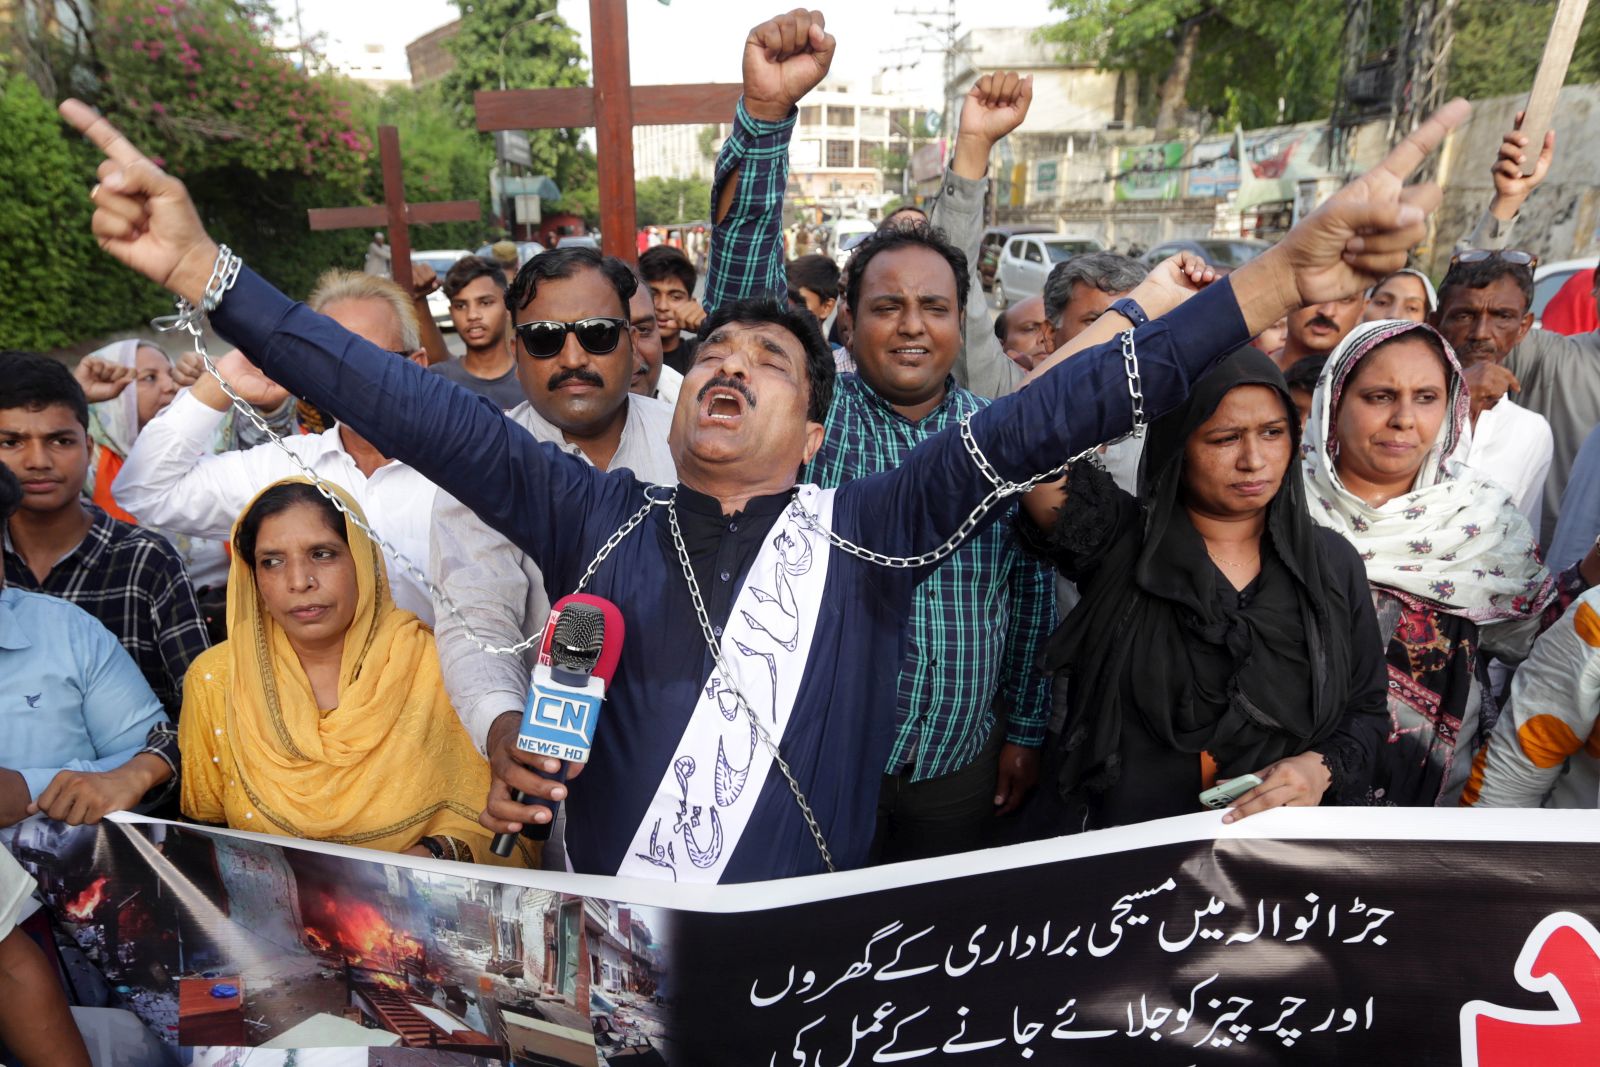 epa10804867 Members of the Christian minority gesture as they shout slogans during a protest against mob attacks that erupted the day before in Jaranwala, near Faisalabad, in Peshawar, Pakistan, 17 August 2023. Armed mobs in Jaranwala targeted two churches and private homes, setting them on fire and causing widespread destruction. The attack was sparked by the discovery of torn pages of the Muslims holy book Koran with alleged blasphemous content near a Christian colony.  EPA/RAHAT DAR